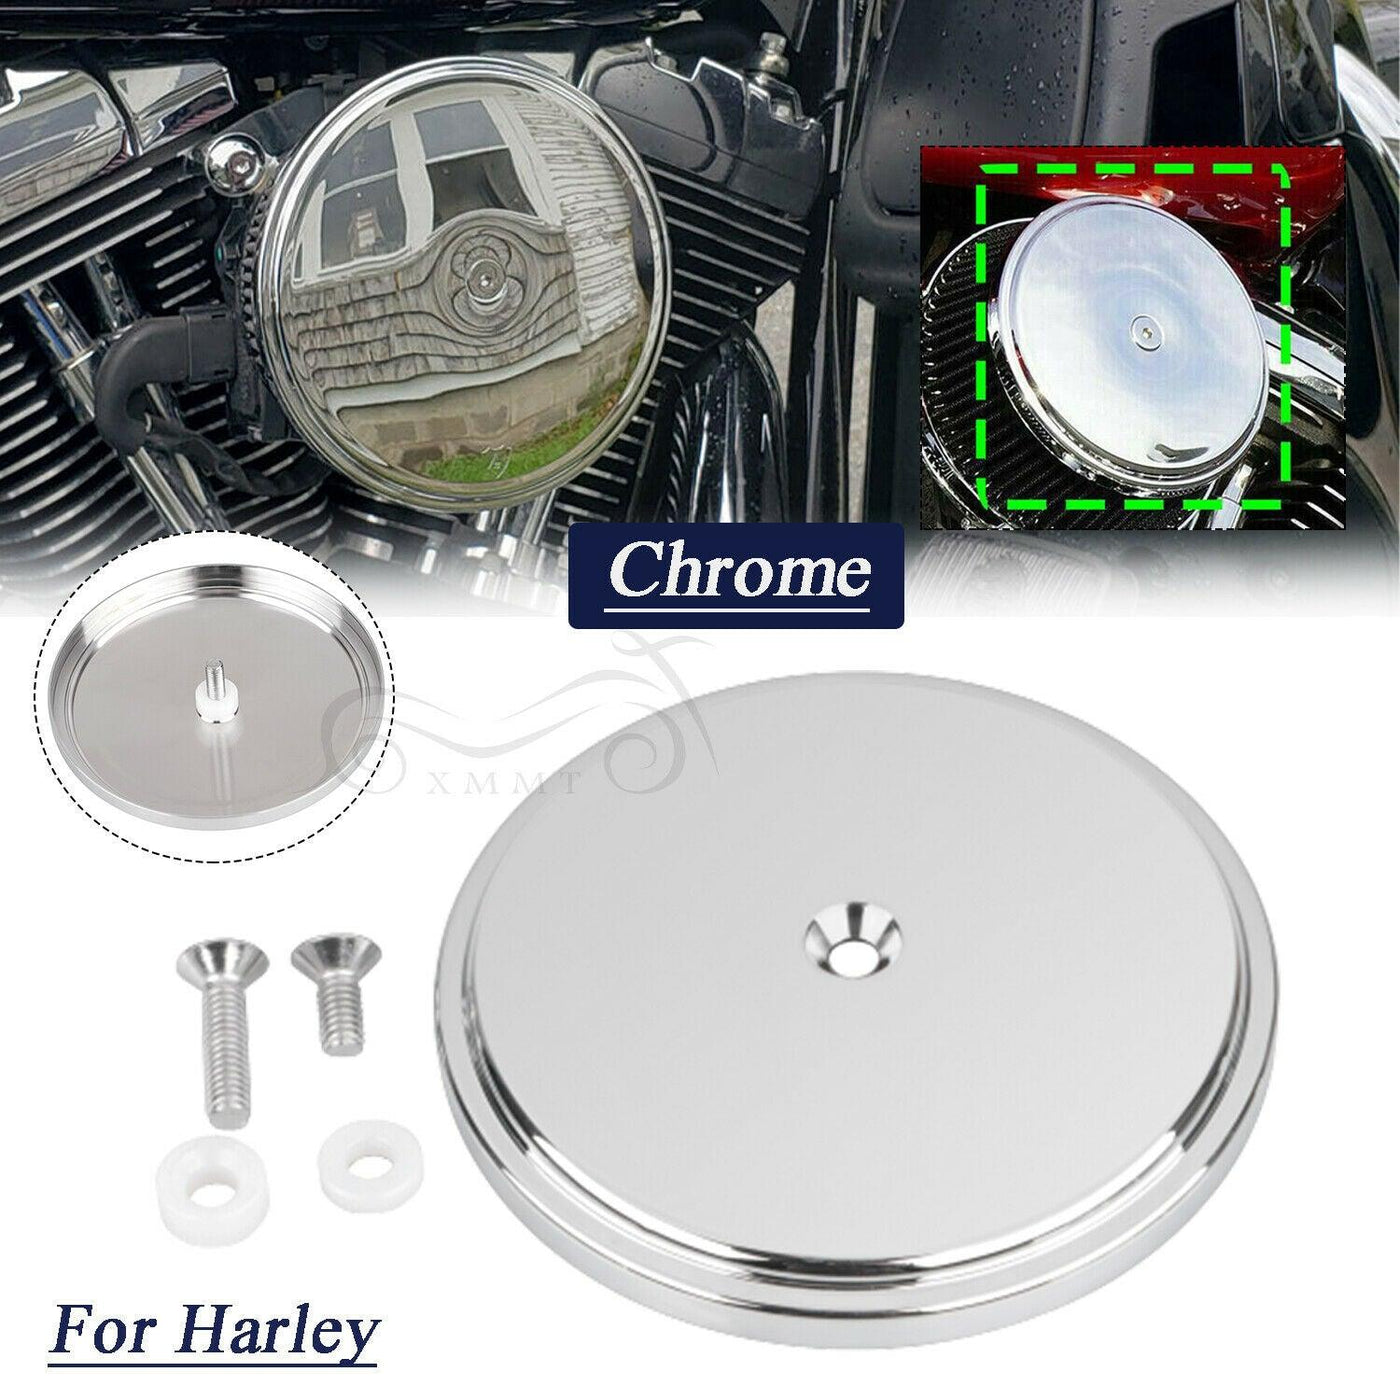 Chrome Stage 1 Big Sucker Air Cleaner Filter Outer Cover For Harley Road King - Moto Life Products